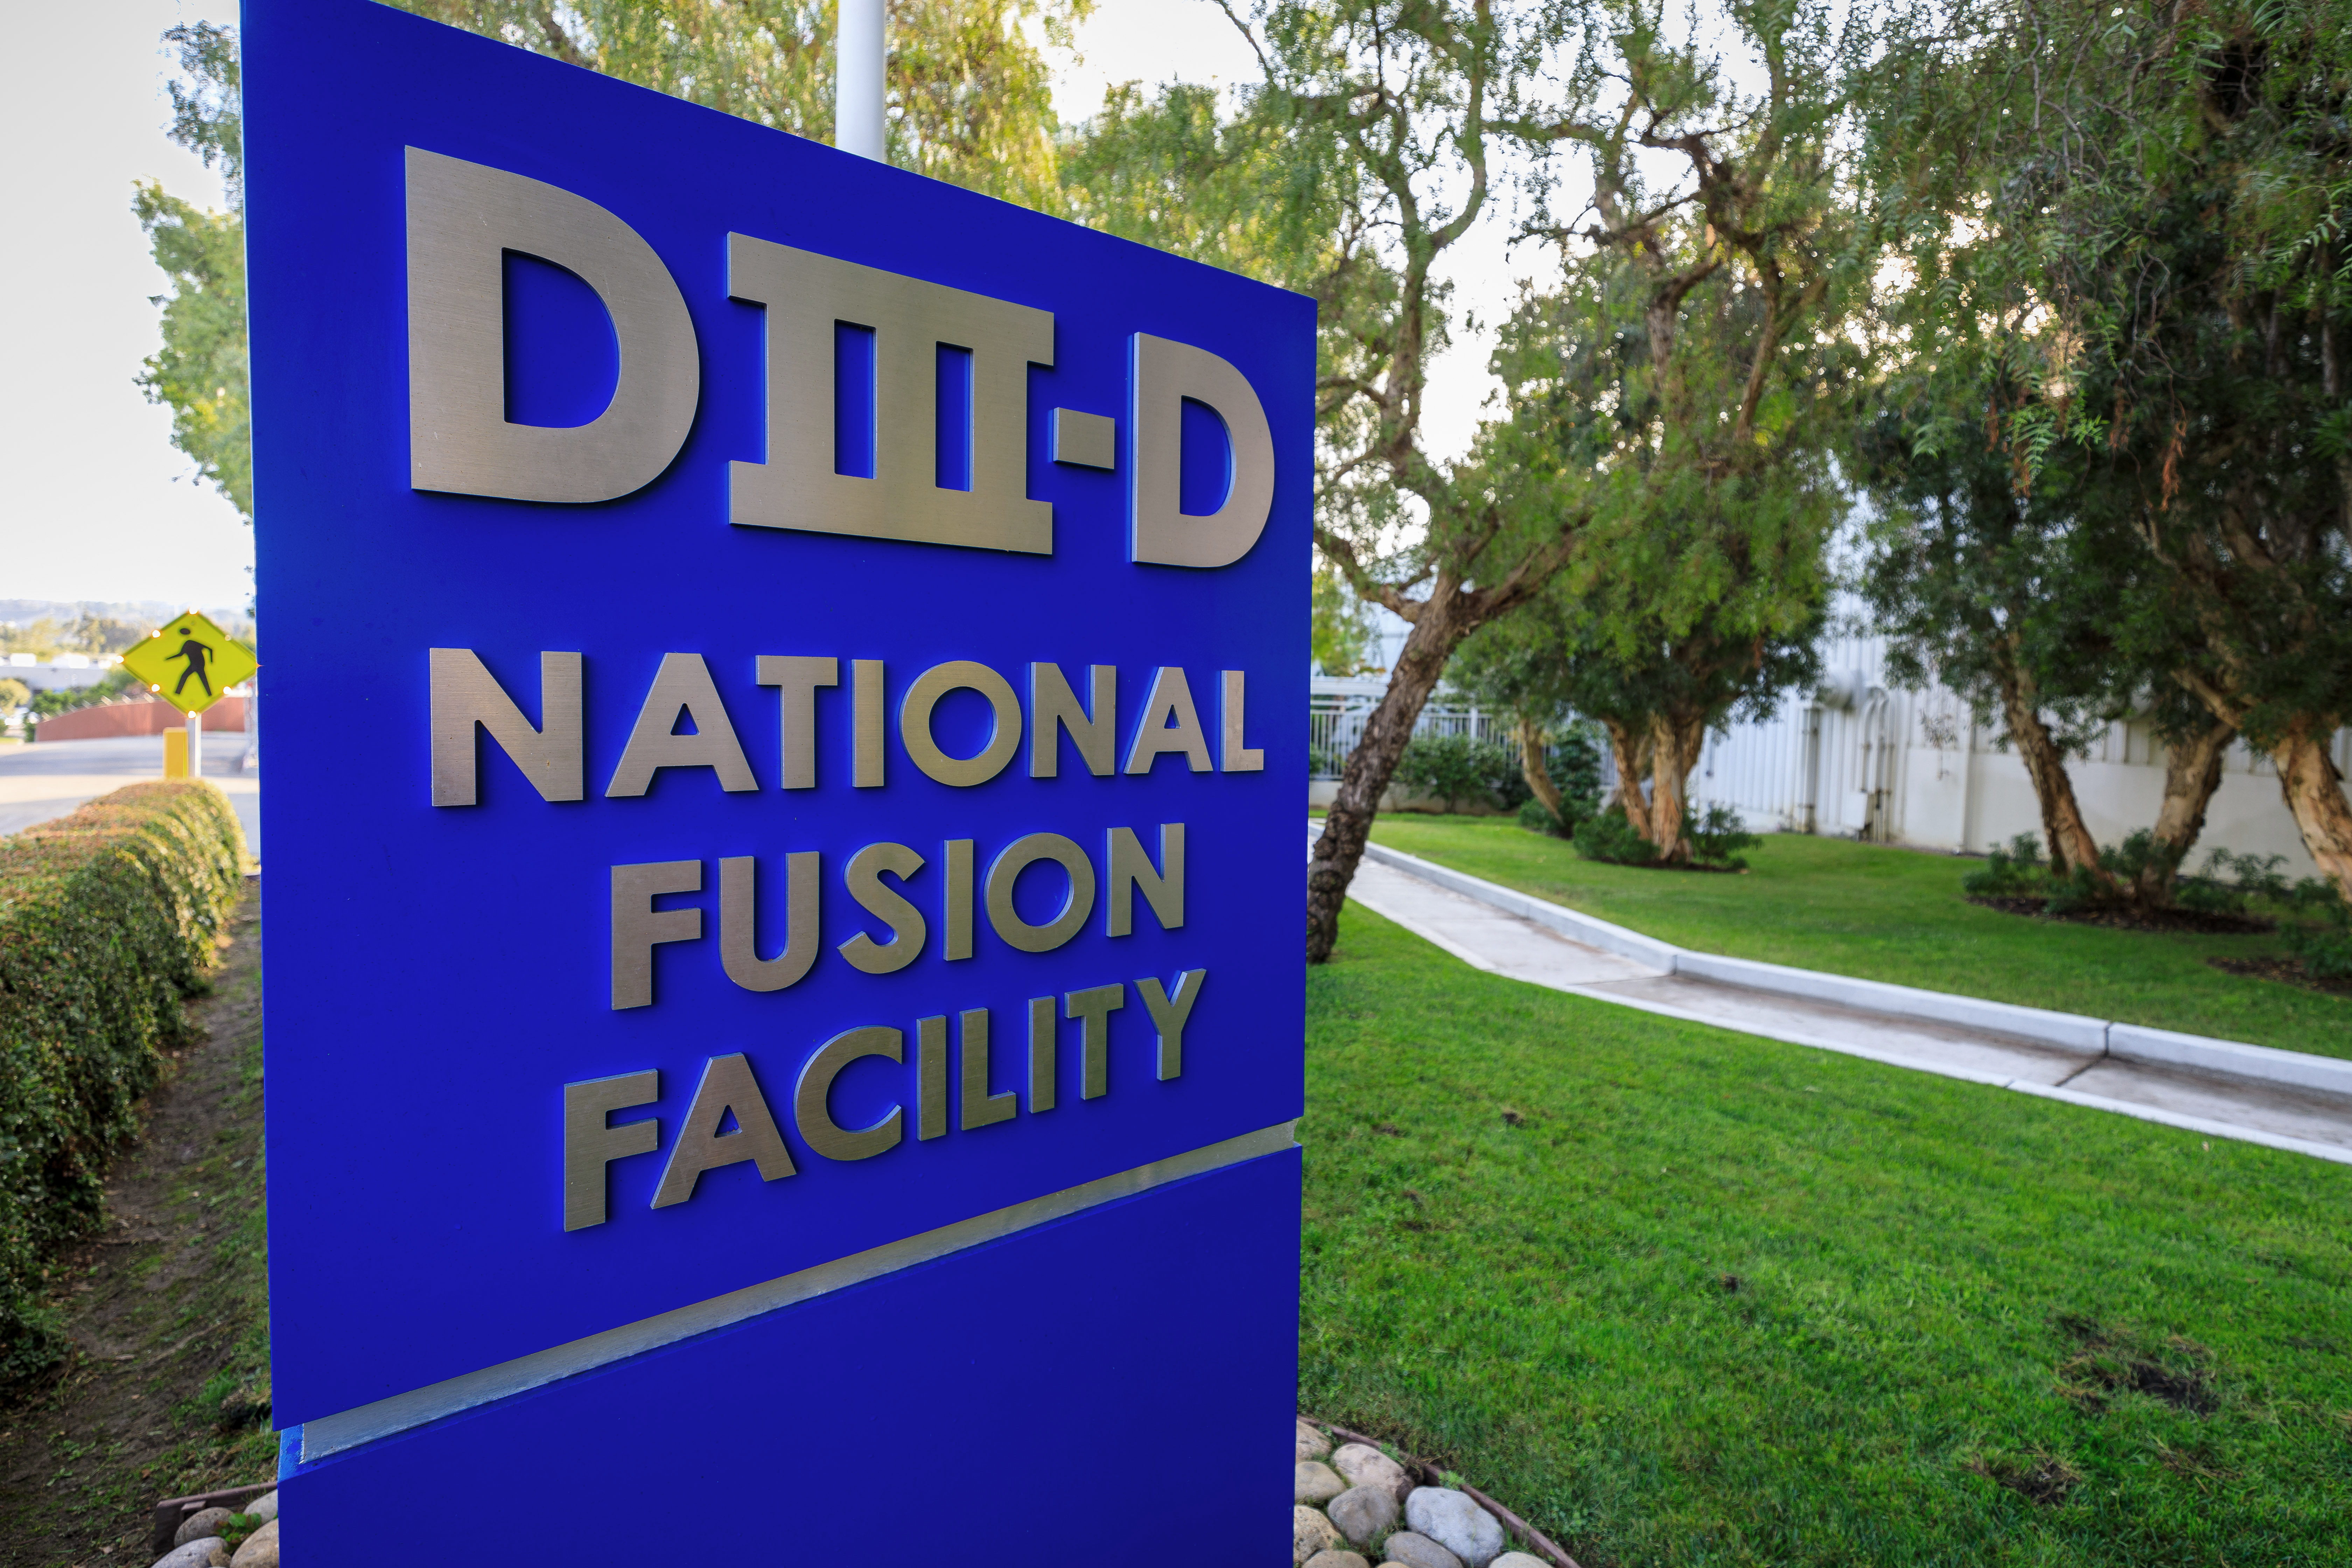 A blue sign reading "DIII-D National Fusion Facility"